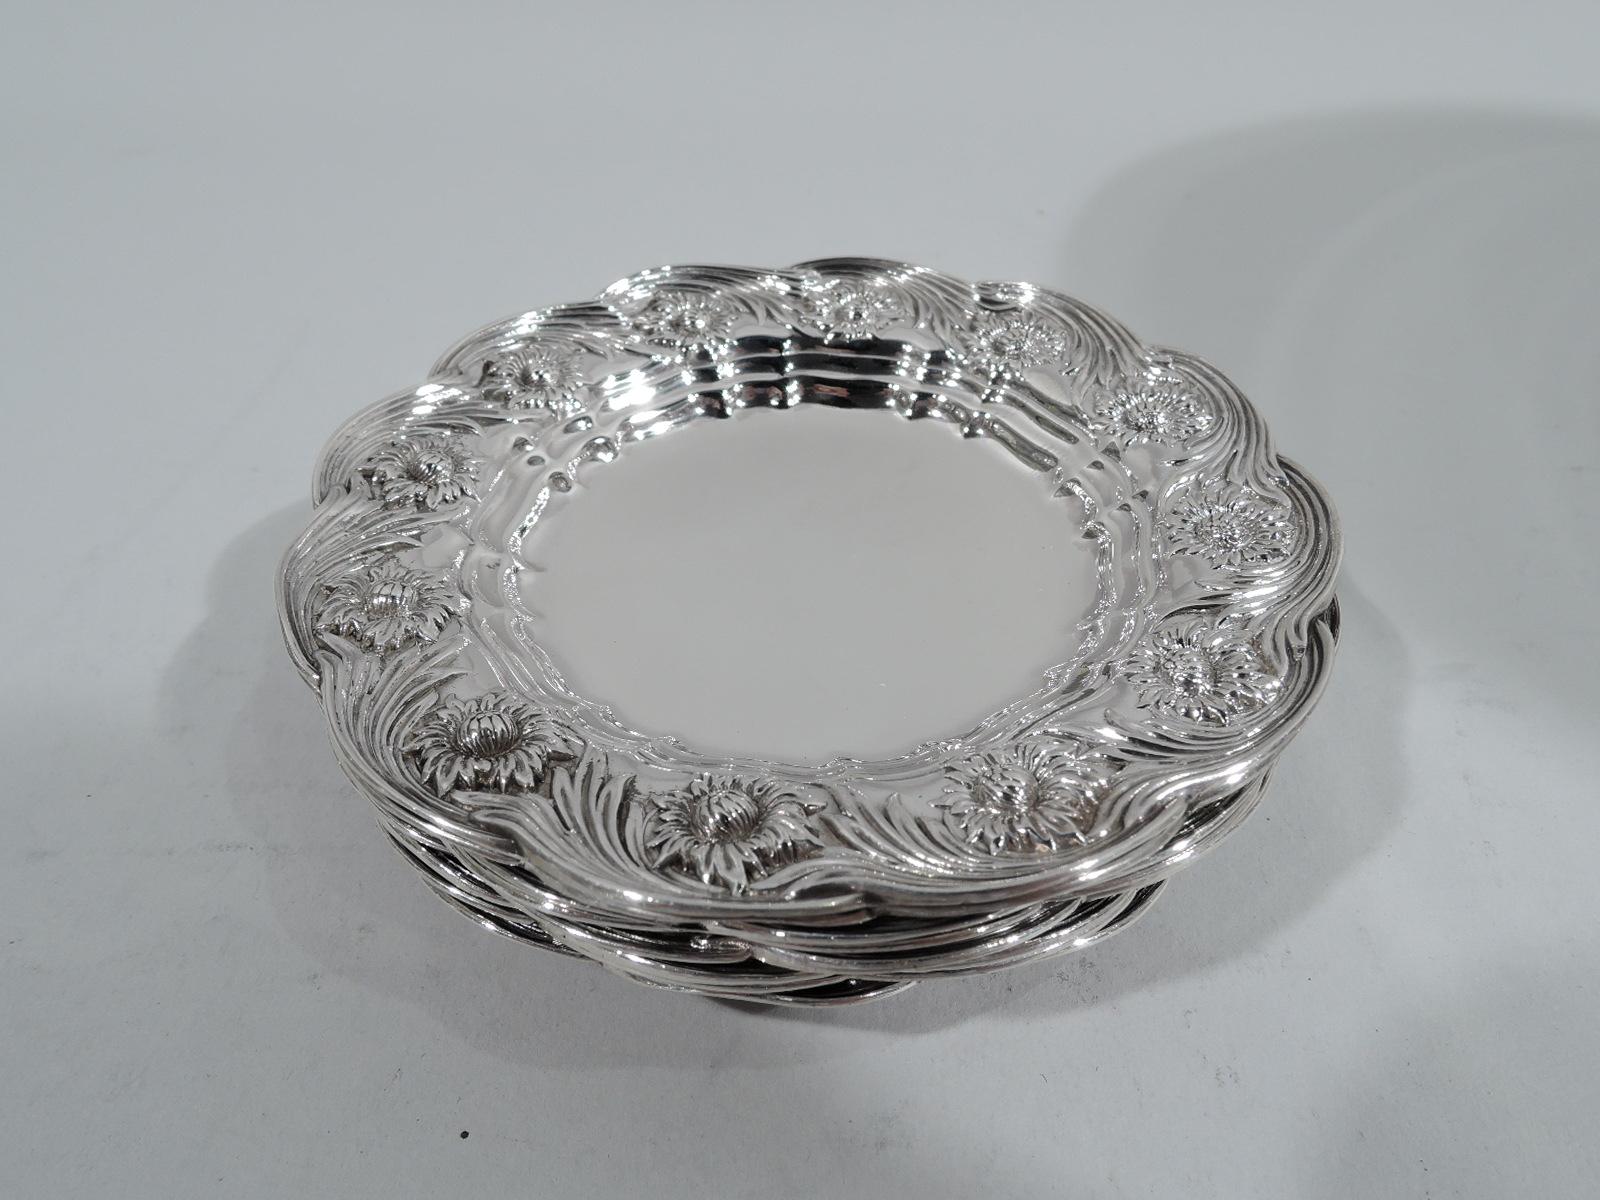 Set of 8 Chrysanthemum sterling silver butter pats. Made by Tiffany & Co. in New York. Plain and round well of which 6 gilt-washed and 2 plain. Shoulder has flower heads surrounded by rolling rinceaux-style tendrils. Rim scalloped. Fully marked